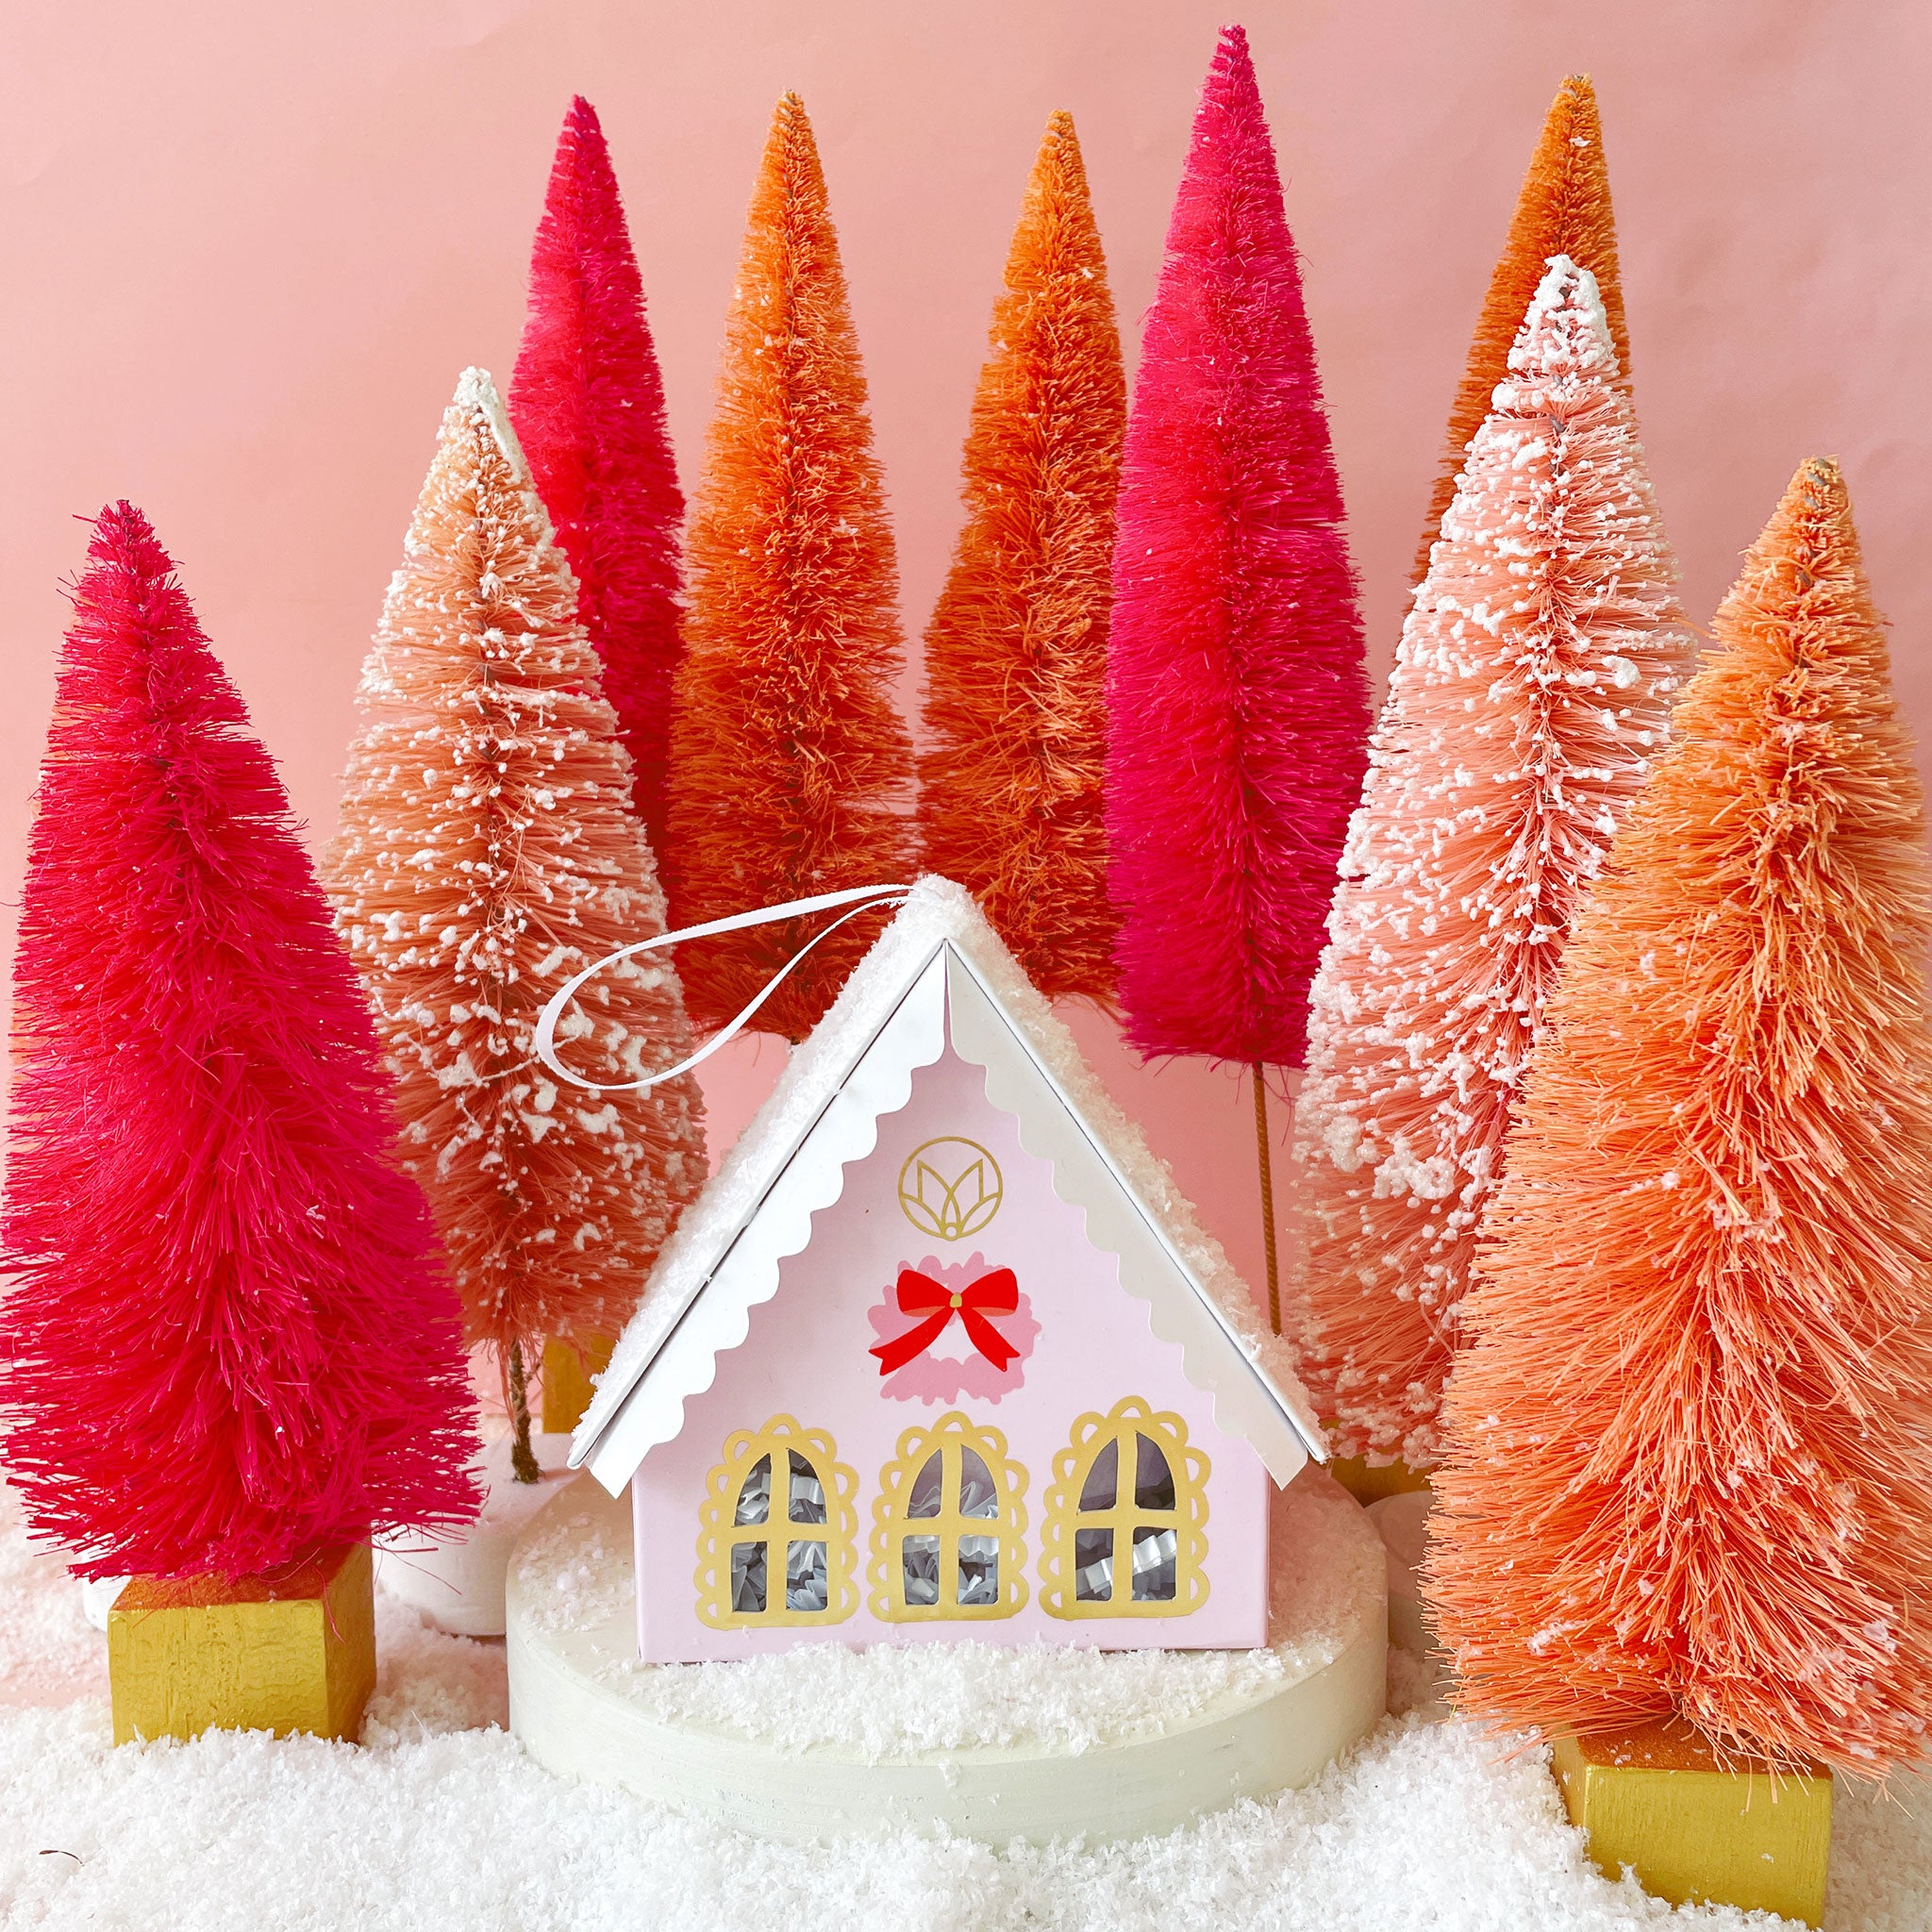 A pink holiday cottage that houses a pink bath bomb. The holiday cottage also doubles as an ornament with its ribbon loop for hanging. Bath bomb house surrounded by pink and orange tinsel trees on snow.